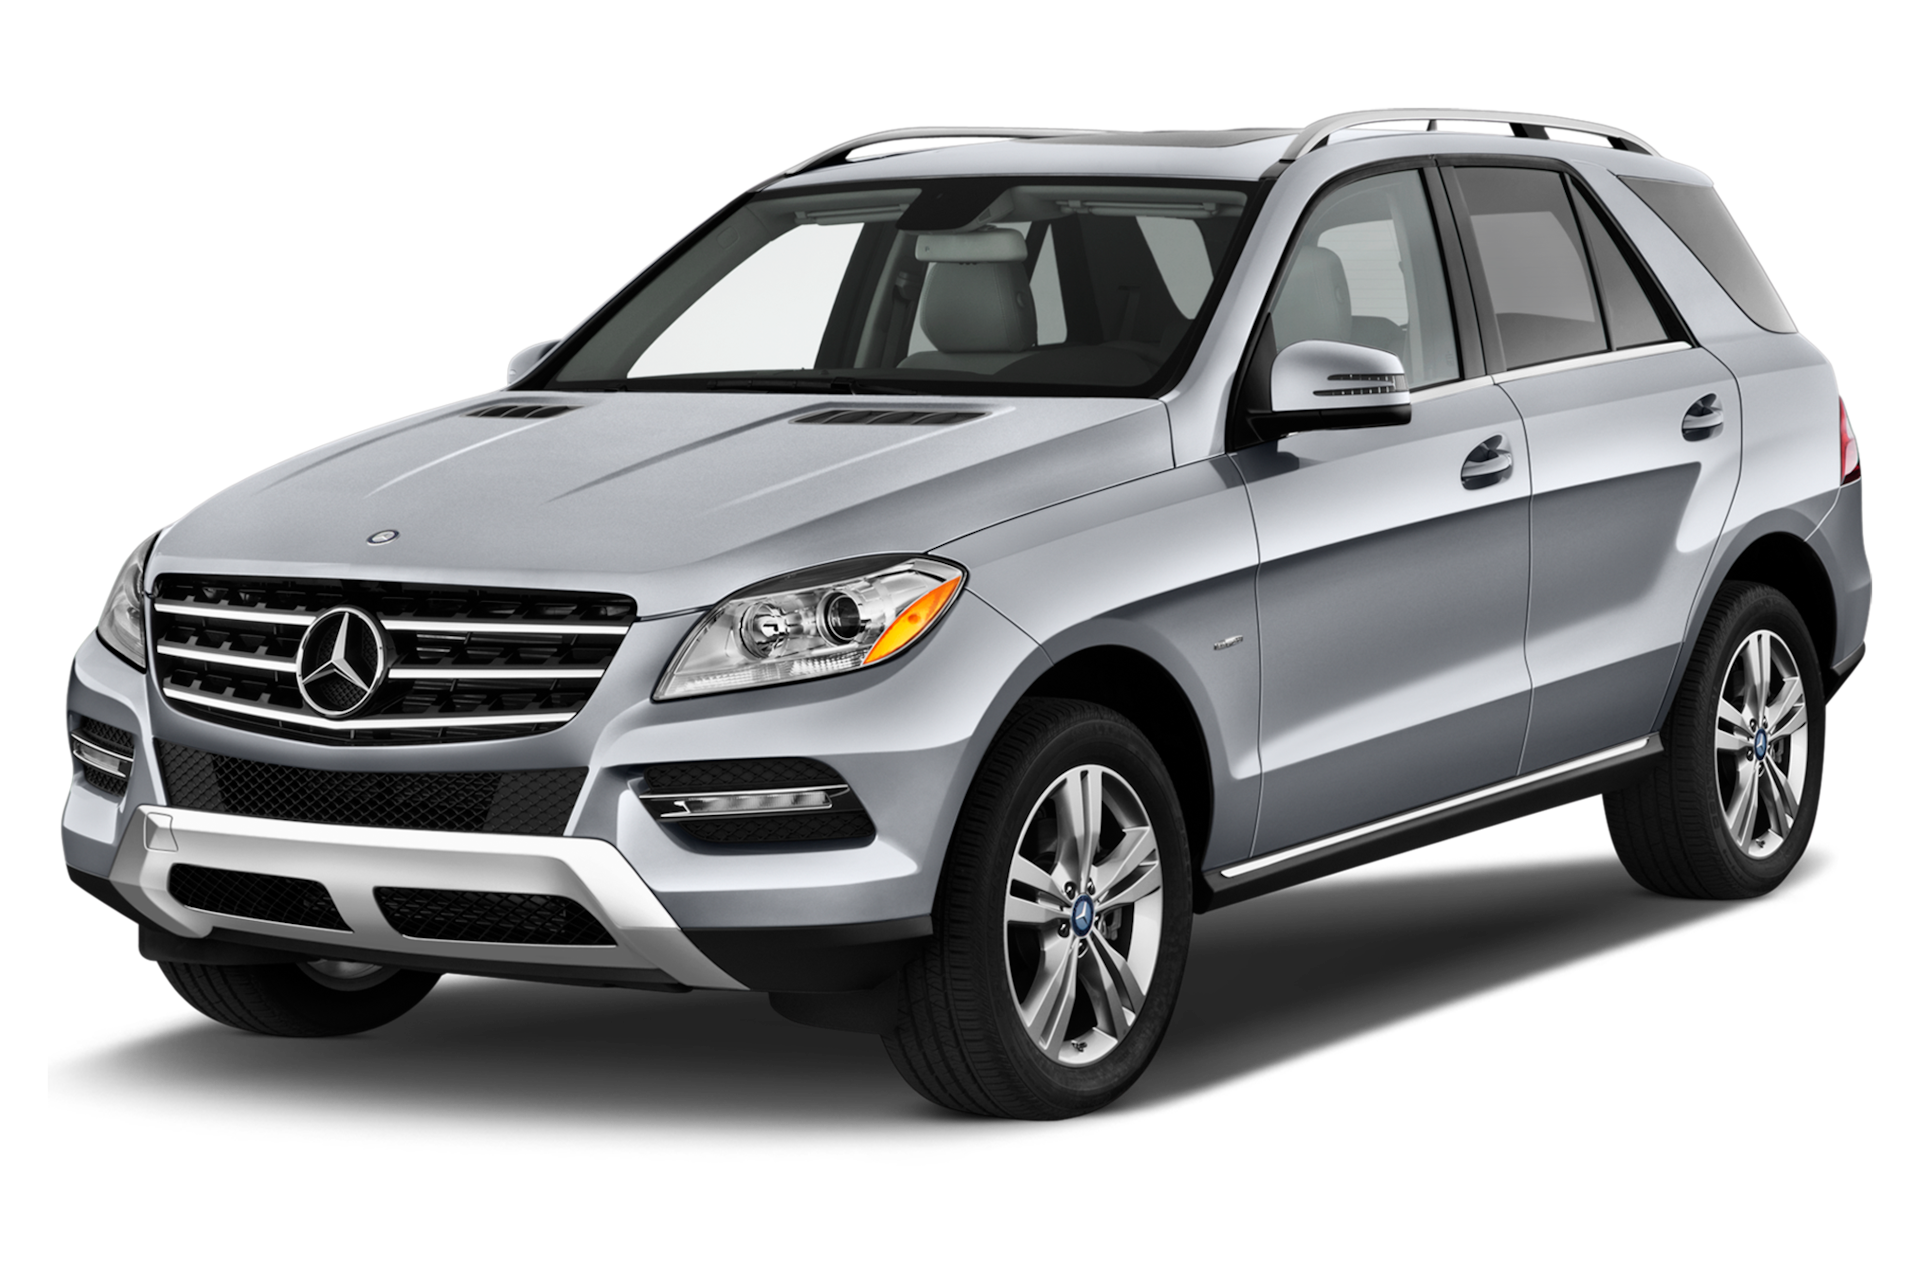 2012 Mercedes-Benz M-Class Prices, Reviews, and Photos - MotorTrend